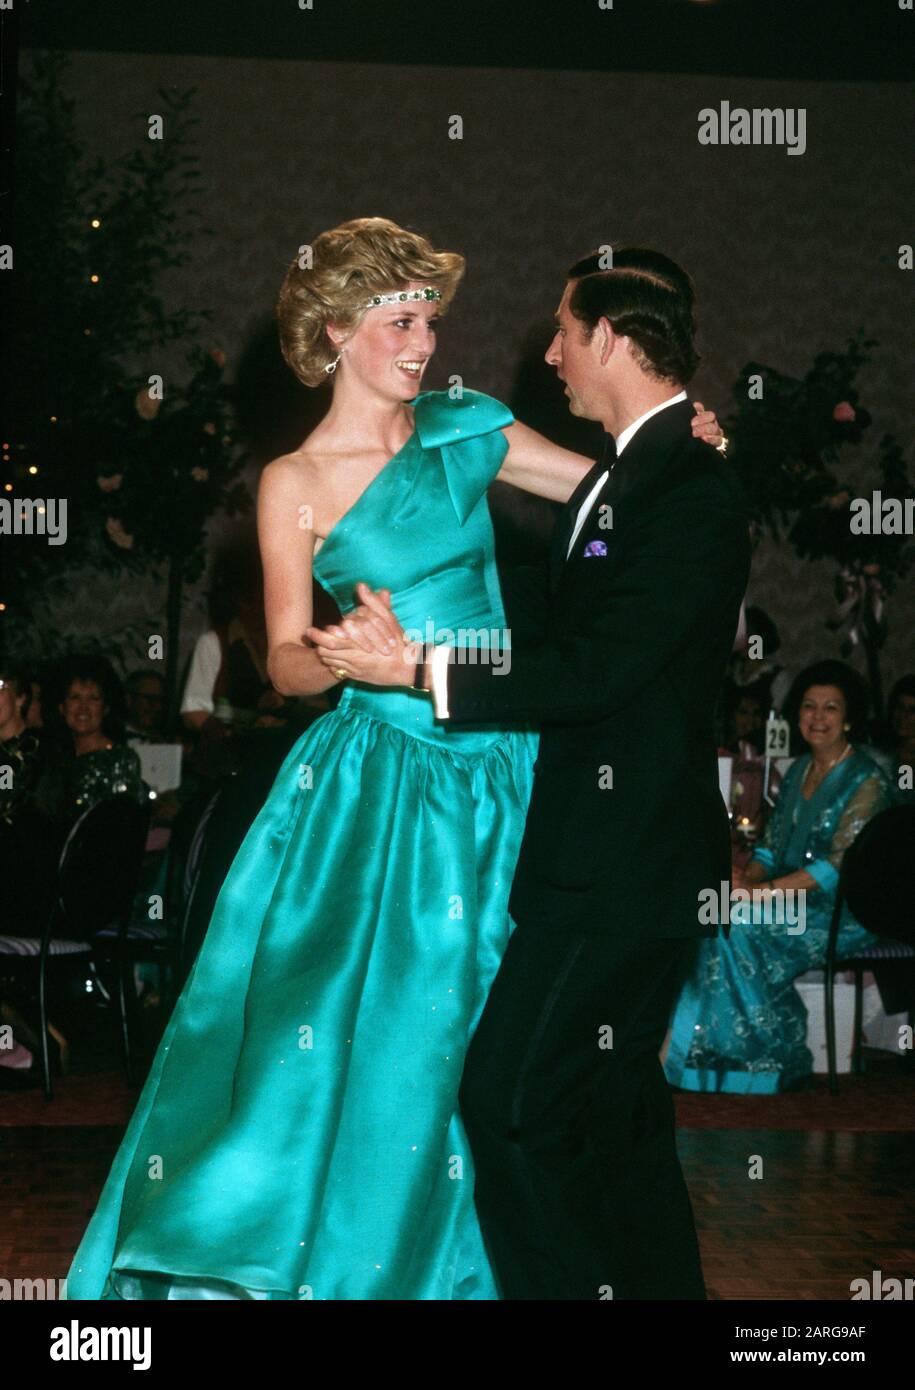 TRH Prince Charles and Princess Diana dancing at The Southern Cross Hotel, Melbourne, Australia October 1985 Stock Photo